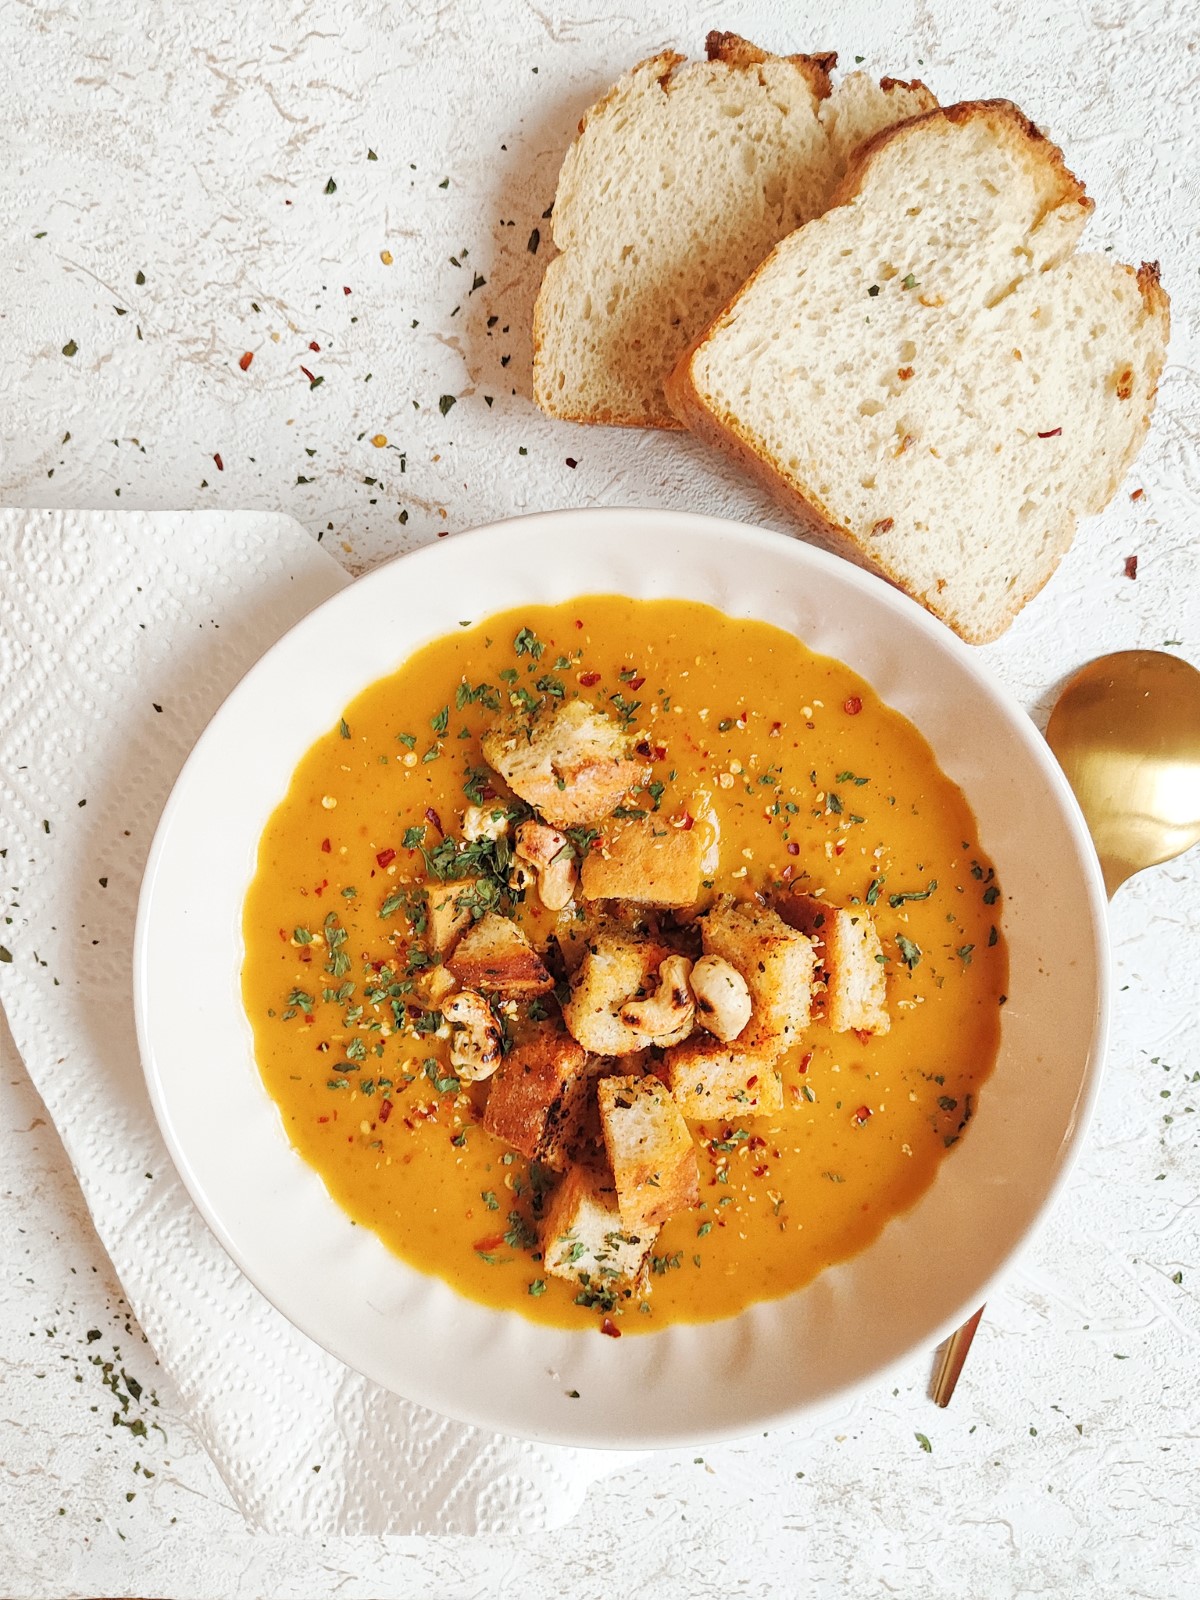 Creamy Pumpkin Soup with Croutons  - Title of the Recipe